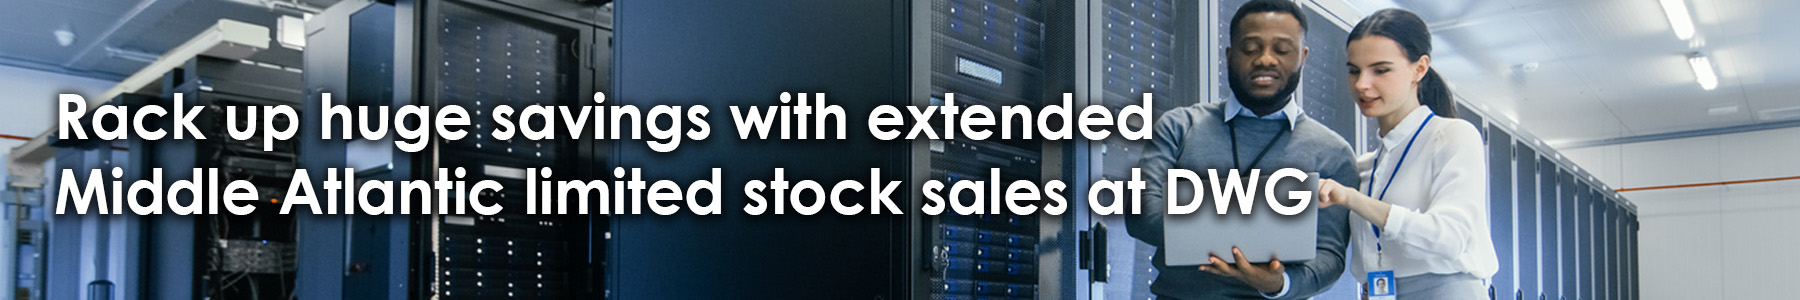 Rack up huge saving with extended Middle Atlantic limited stock sales at DWG